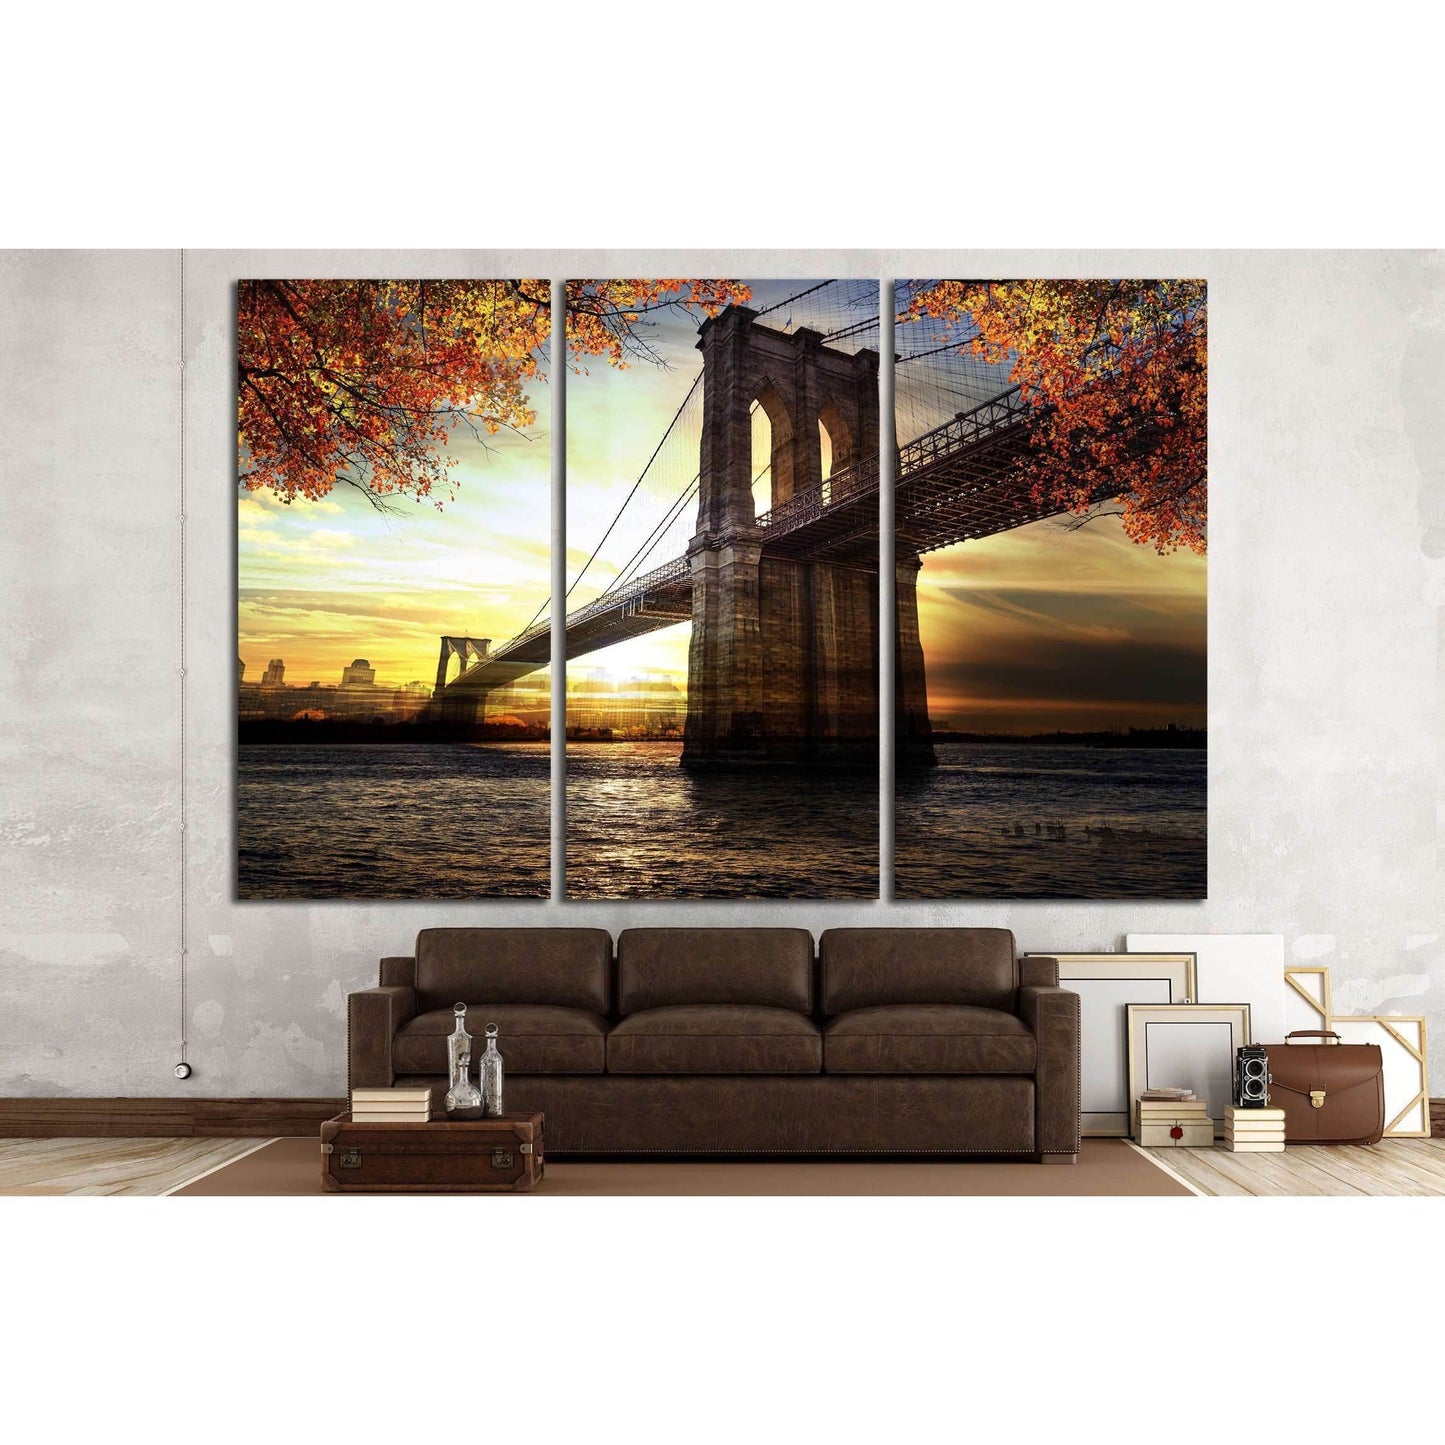 Autumn Sunset Brooklyn Bridge Canvas for Urban Home DecorThis canvas print showcases the Brooklyn Bridge at sunset, framed by the warm autumnal foliage. The sun's reflection on the water and the silhouette of the city skyline in the background add depth a